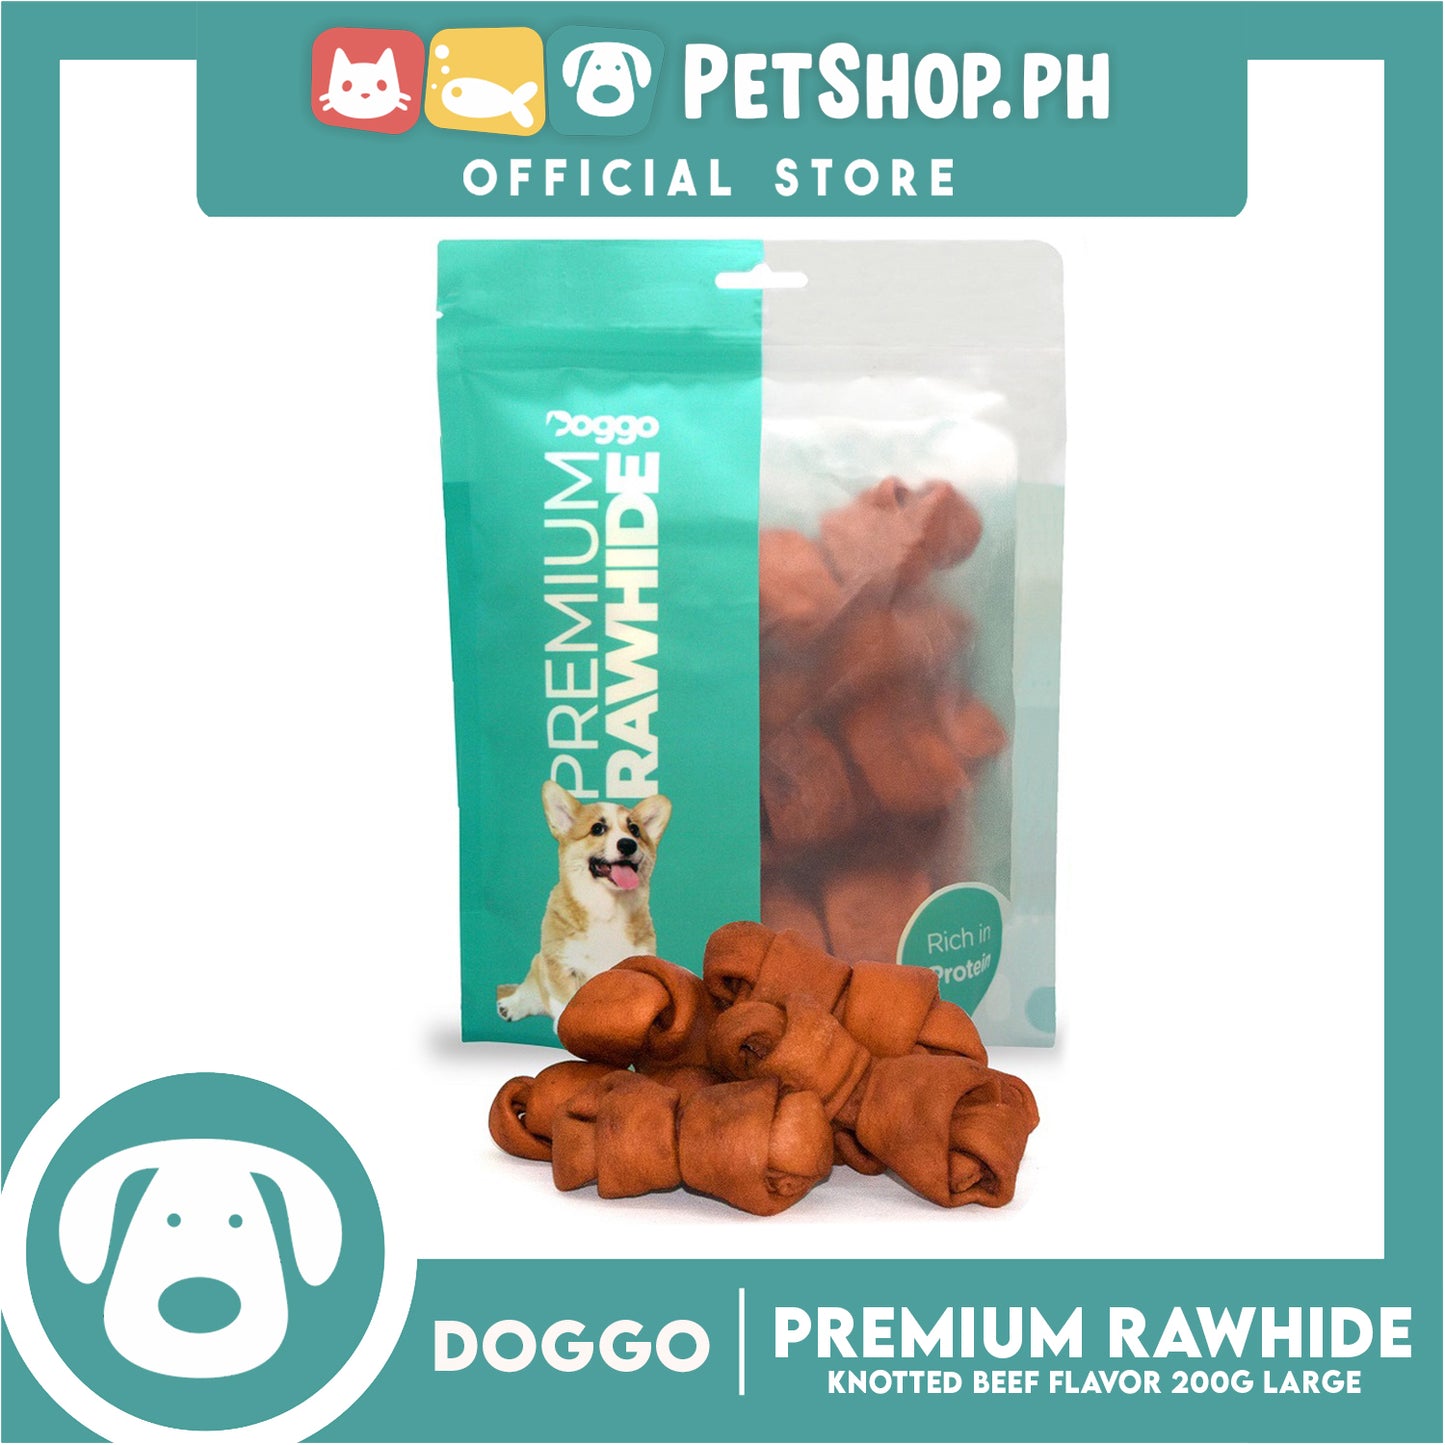 Doggo Premium Knotted Rawhide Beef Flavor (Large) Chewable Treat for Your Dog